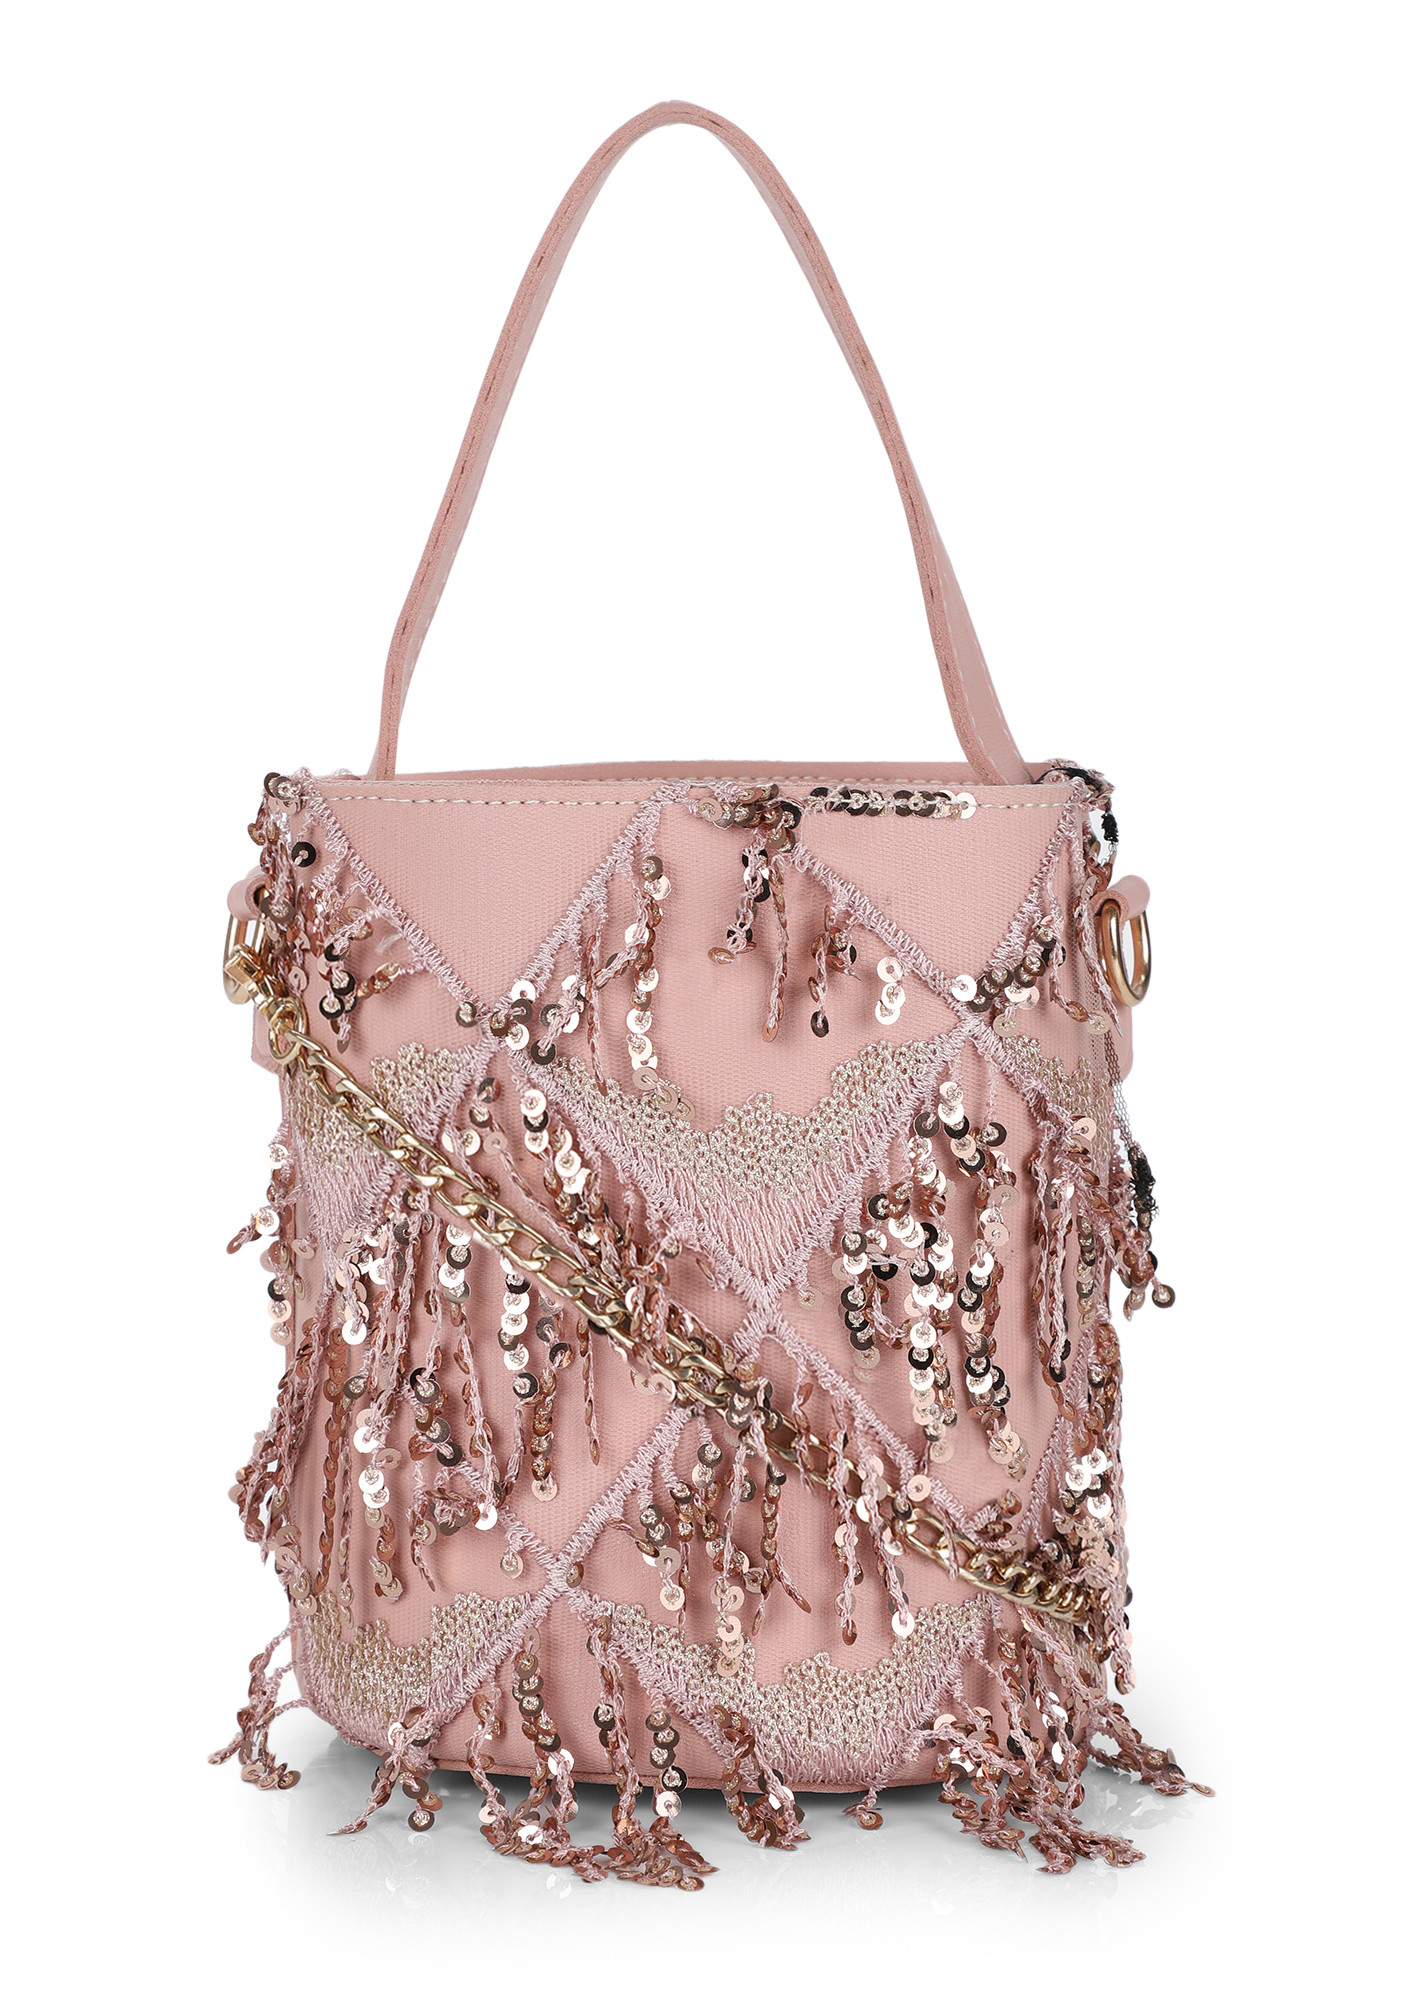 BRING ON THE SEQUINS PINK BUCKET BAG